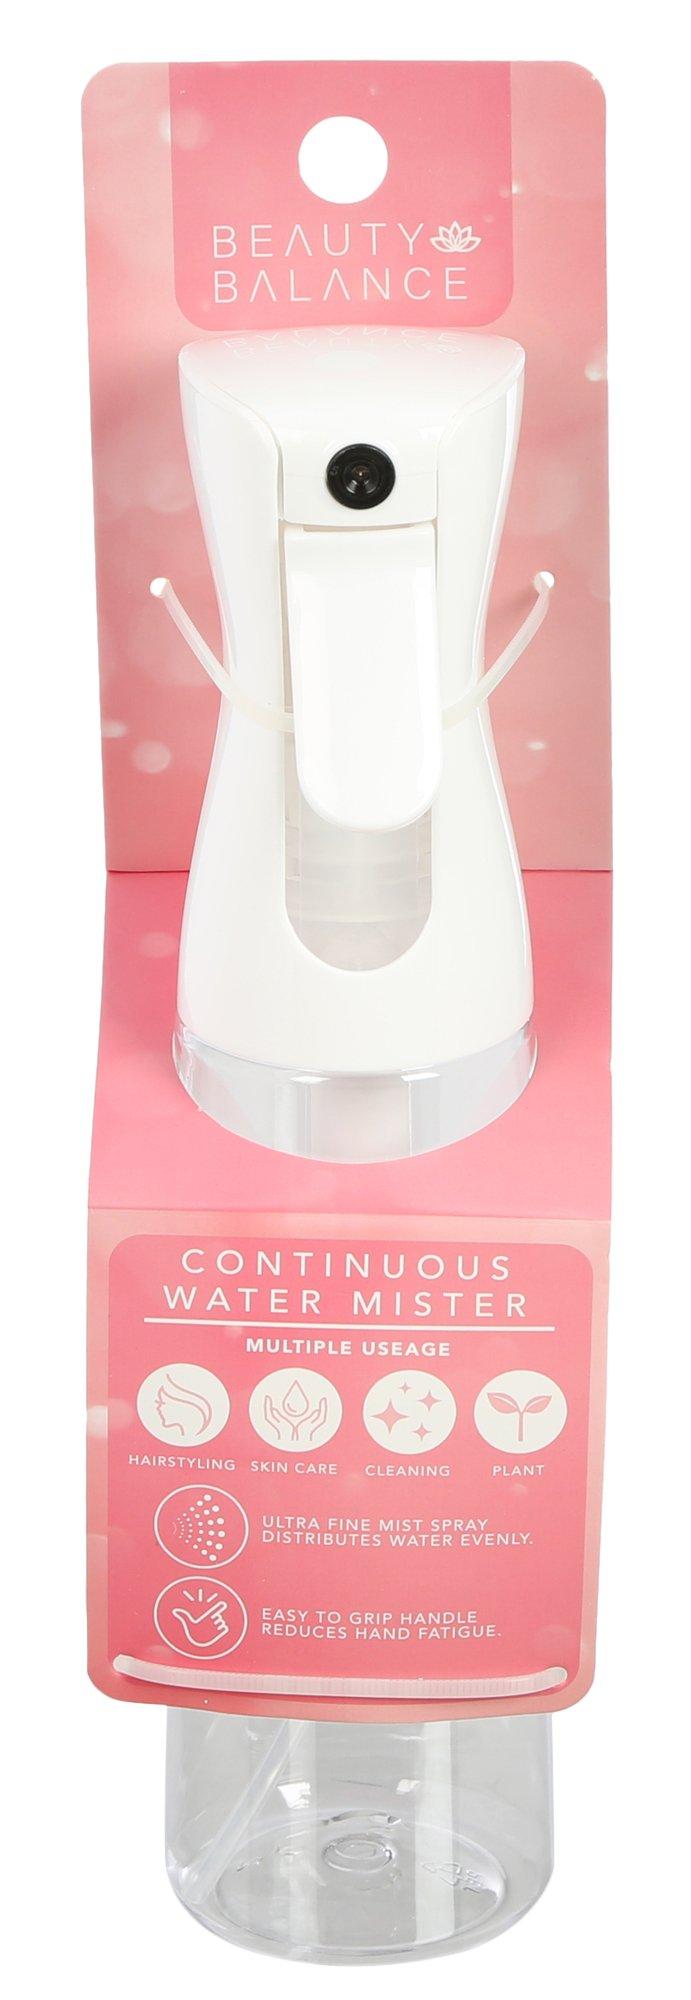 10 oz Continuous Water Mister